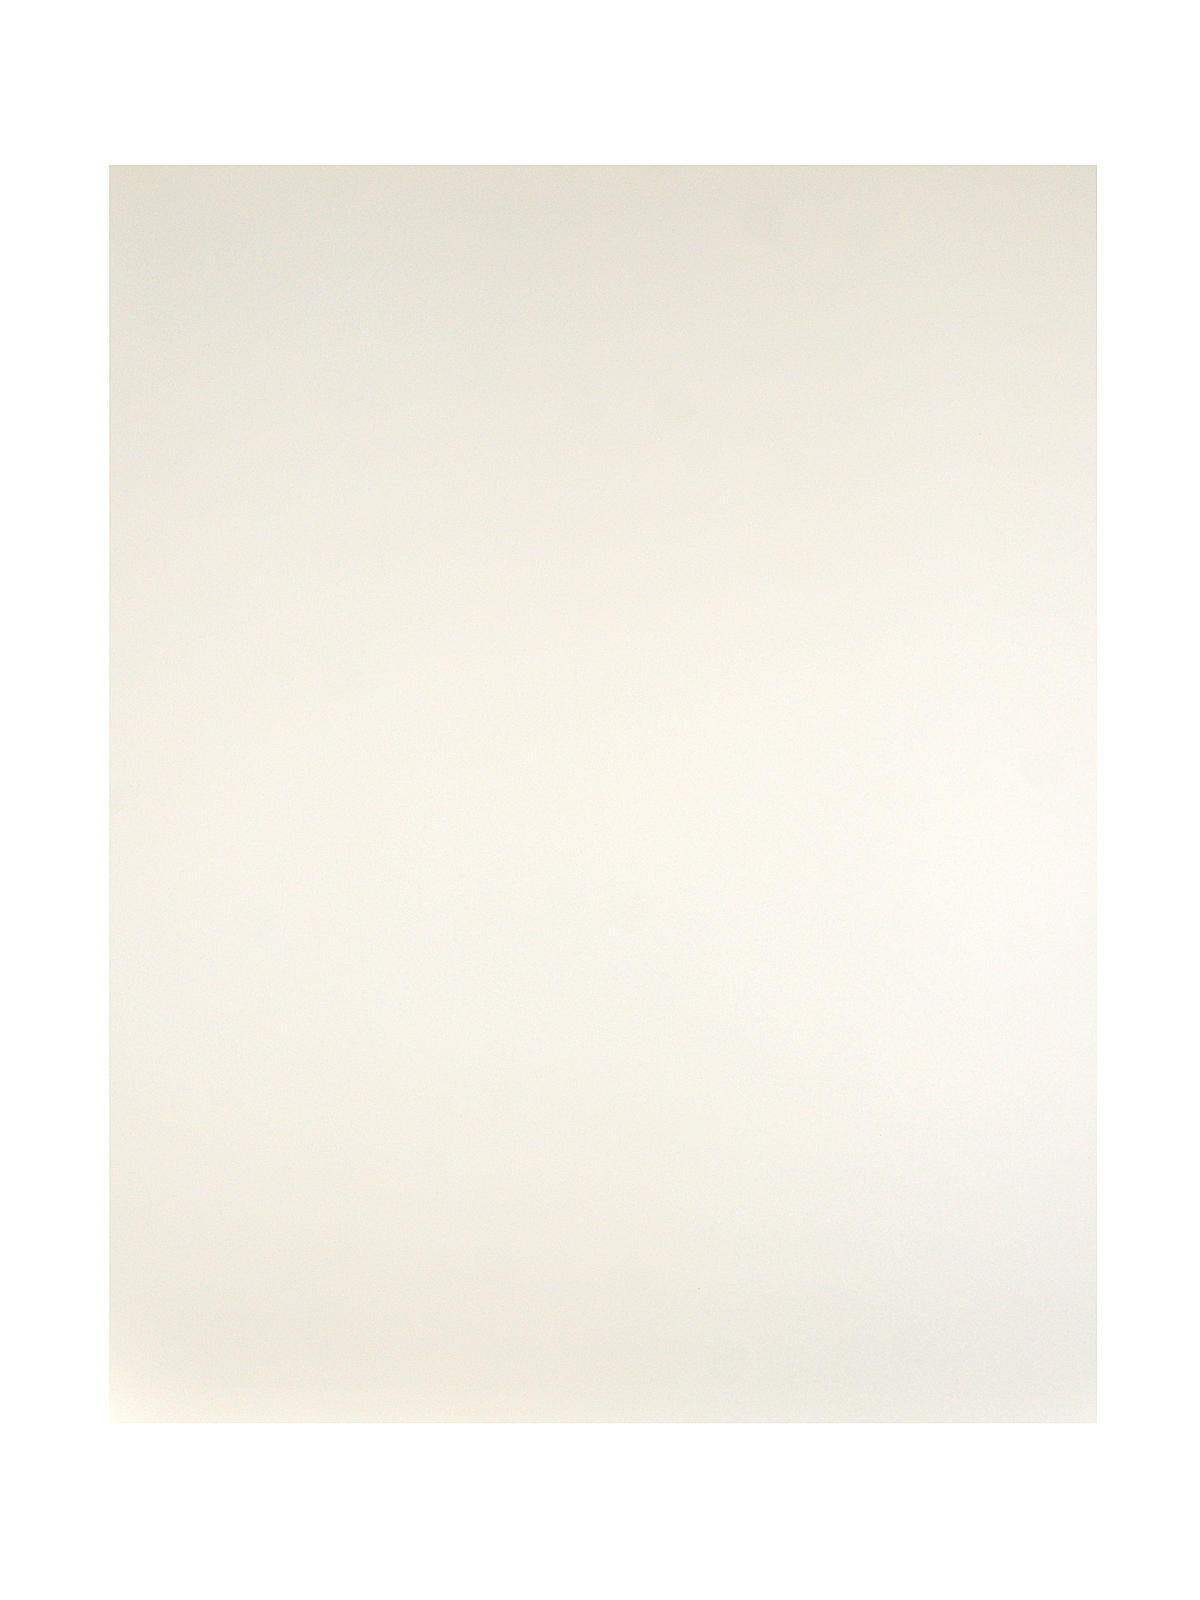 Museum Mounting Board Acid Free White 4 Ply Each